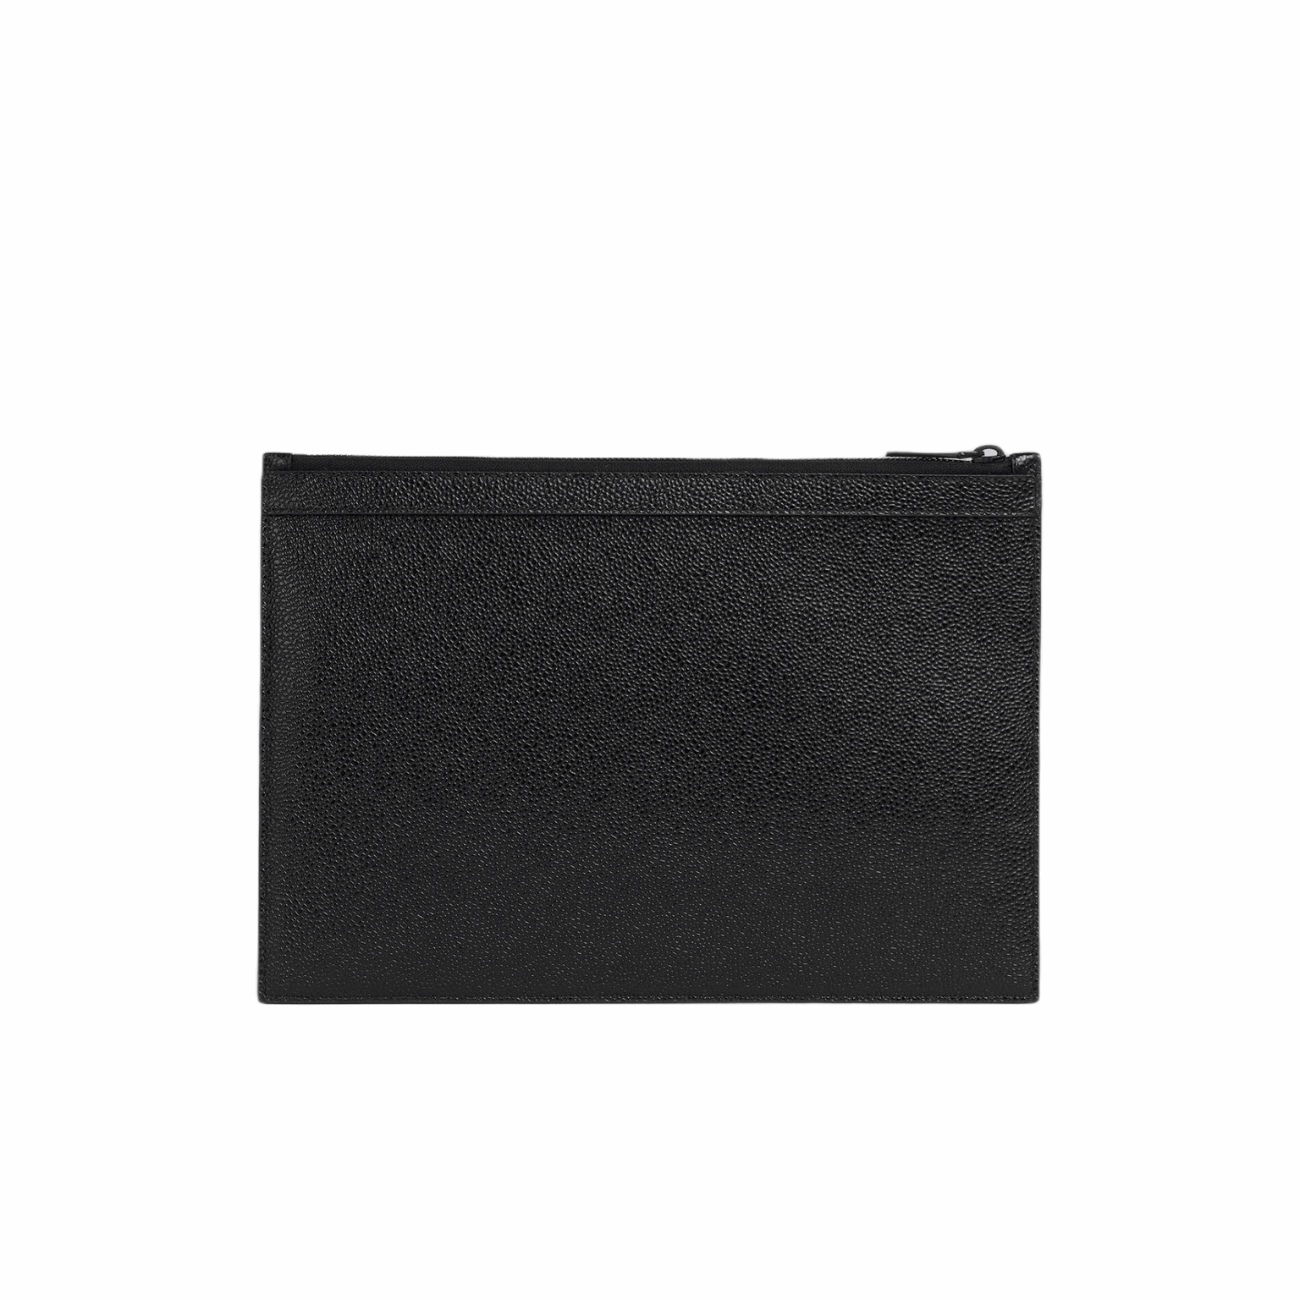 Thom Browne MAC124A00198001 Pebble Grain Leather 4-Bar Brass Label Small Document Holder, Black